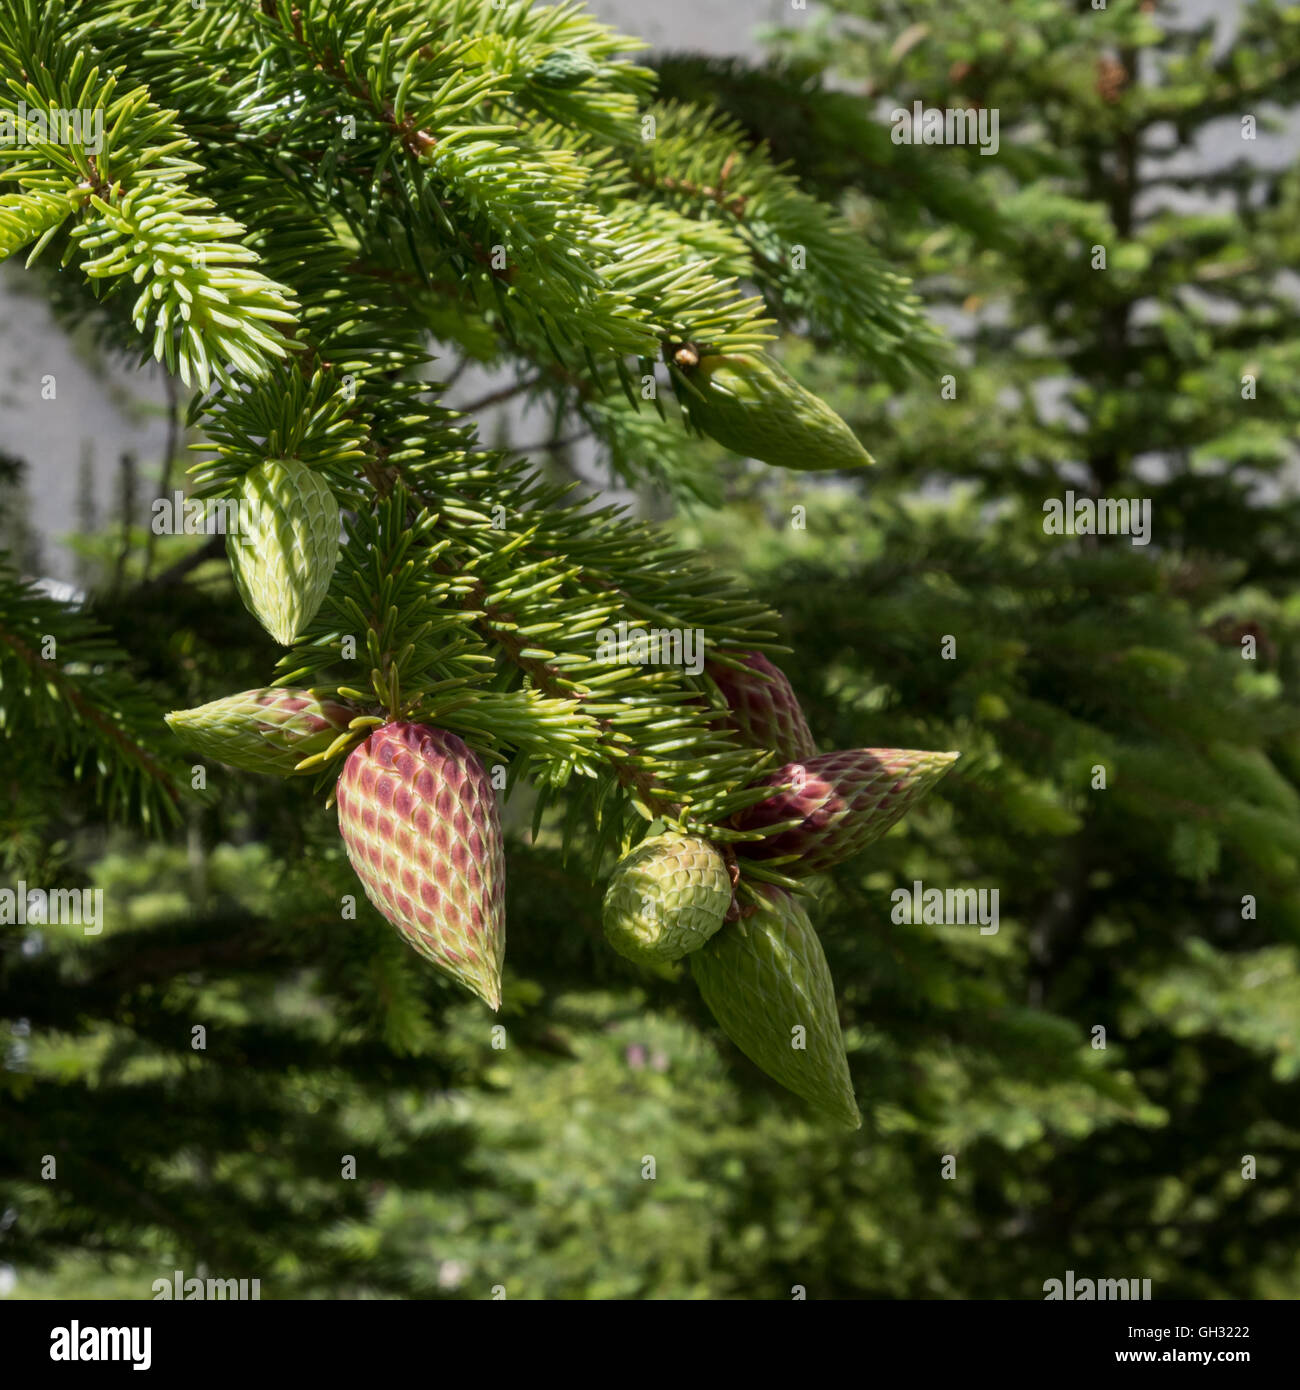 Strawberry Like Pine Cones hang in fir tree Stock Photo